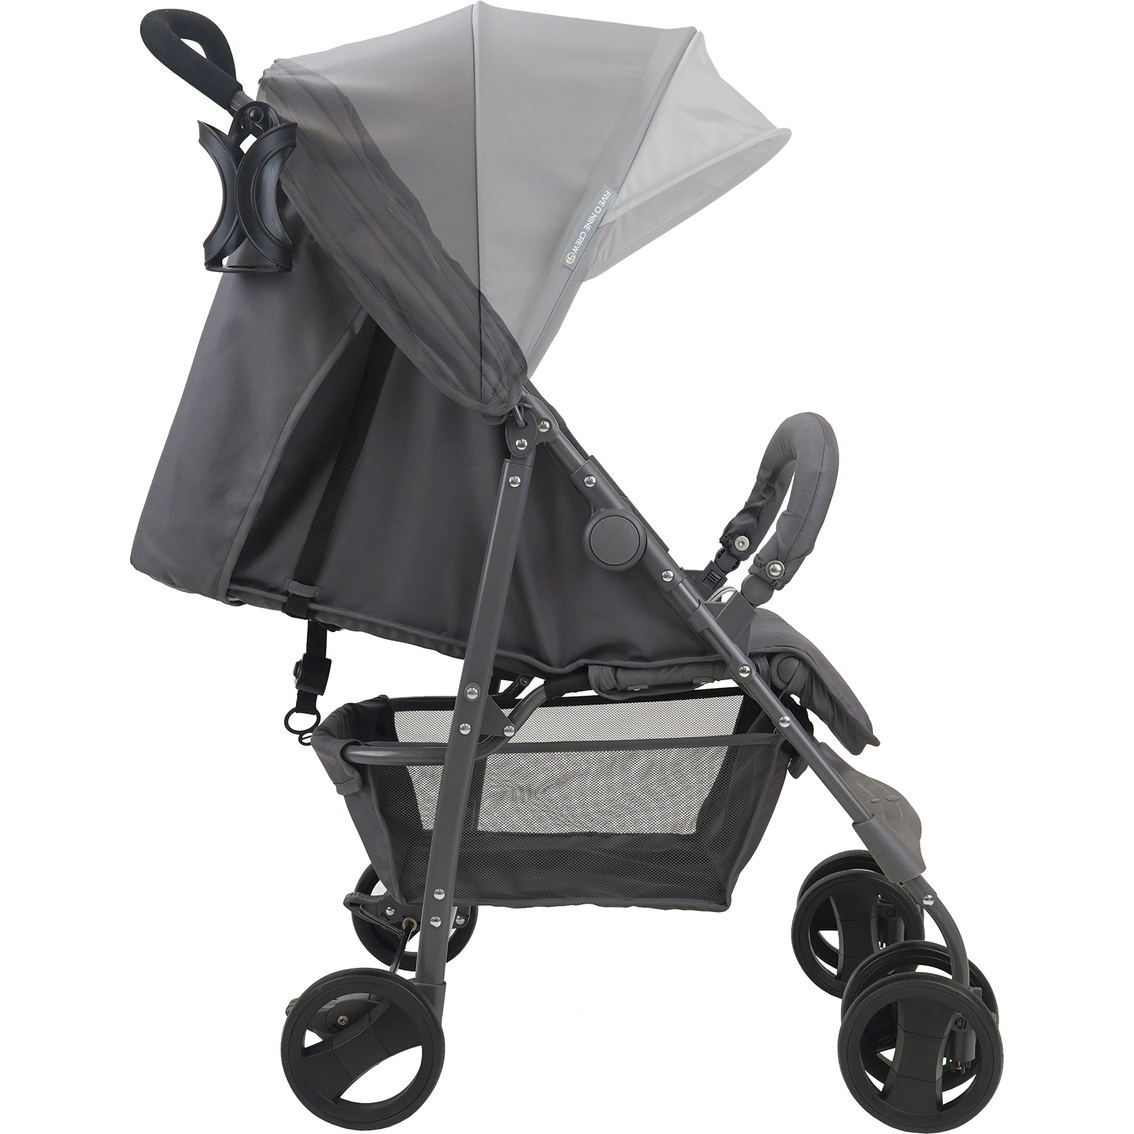 Shopee Lightweight Stroller with Extra Large Canopy - Image 3 of 5